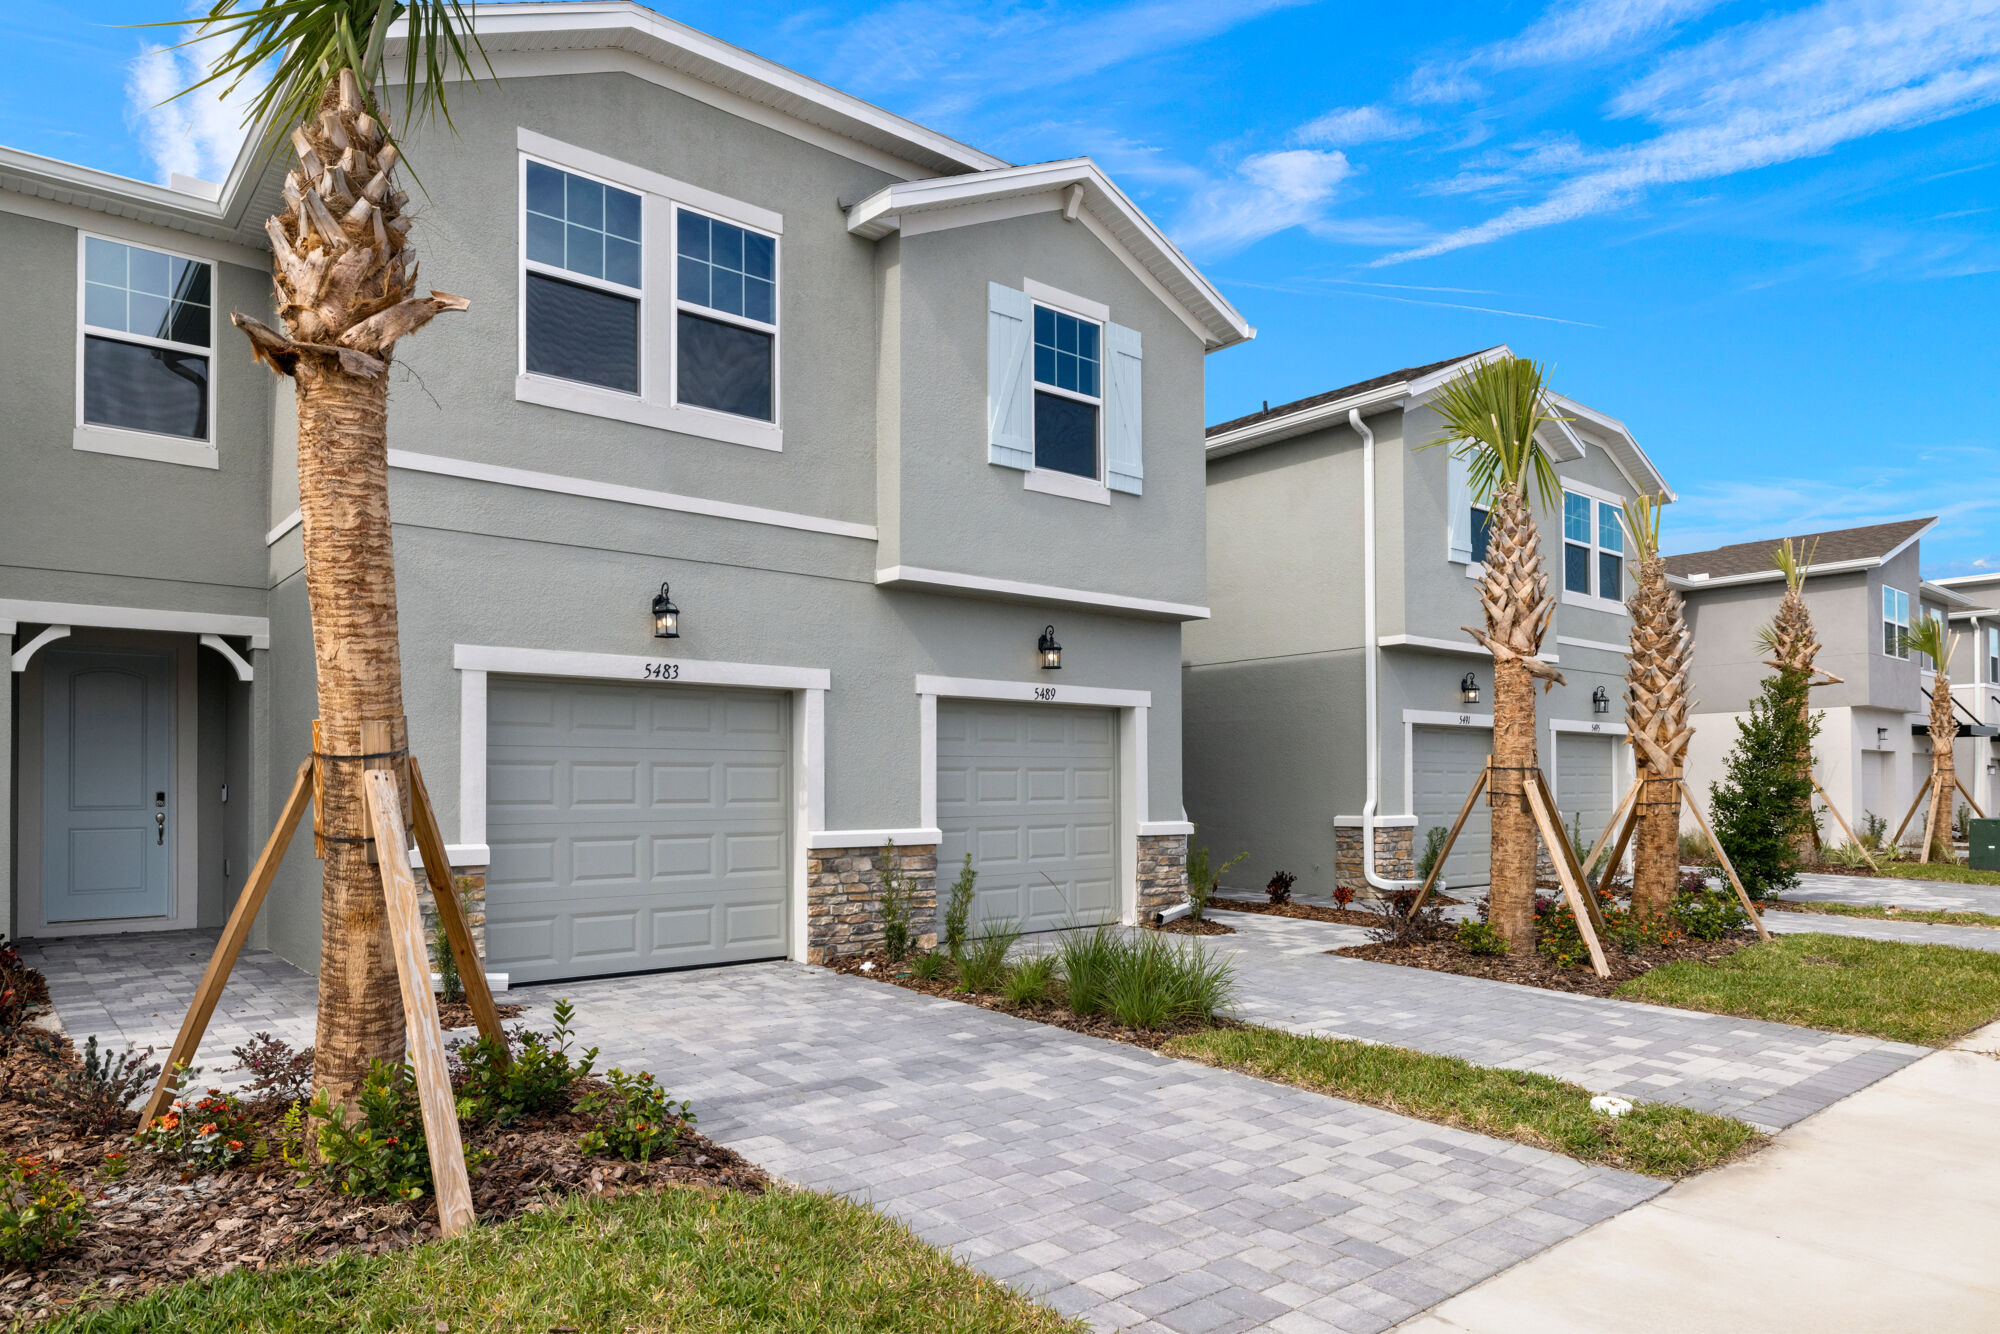 Townhome, 3 bedrooms, two and half baths, oversized tile floors on main, screened lanai, located in a master planned community, walk-in closets, loft, breakfast bar, pantry, 42" upper cabinets, linen colored cabinets, quartz countertops 